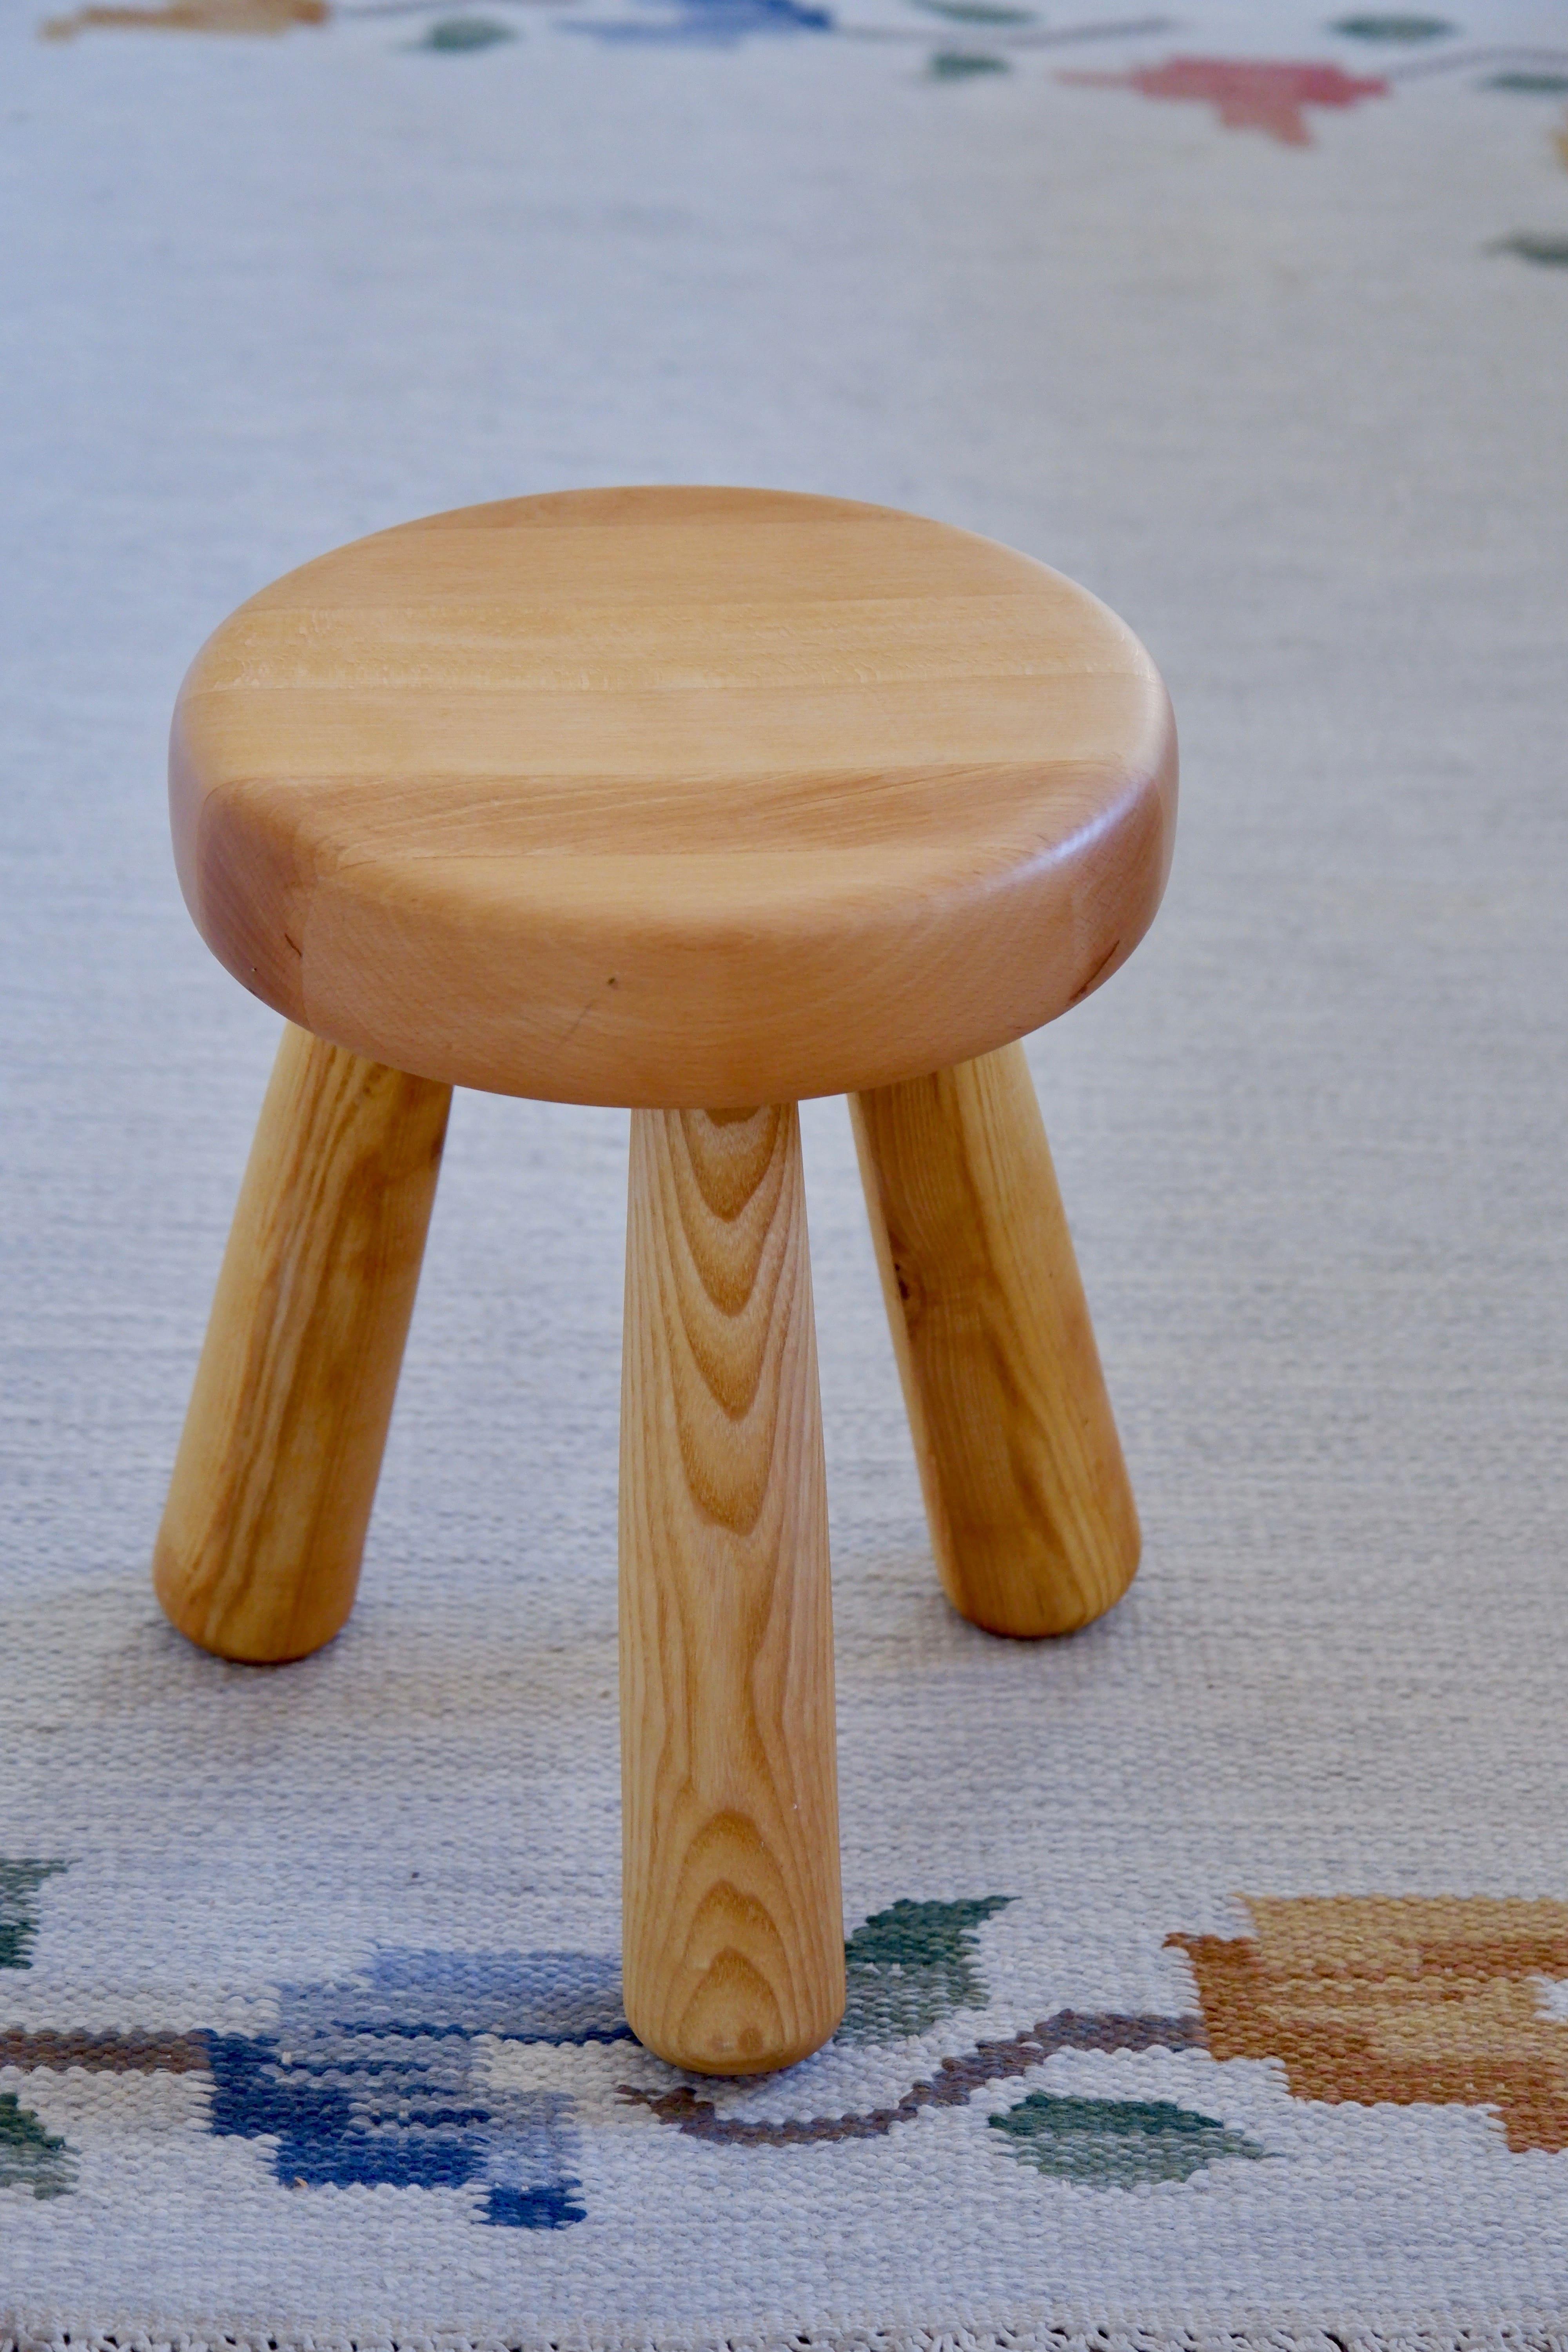 Rare mix wood Ingvar Hildingsson stool made in Beech & ash wood during the last part of the XXème century. The stool is in verry good condition, it's mark and labeled by the artist.